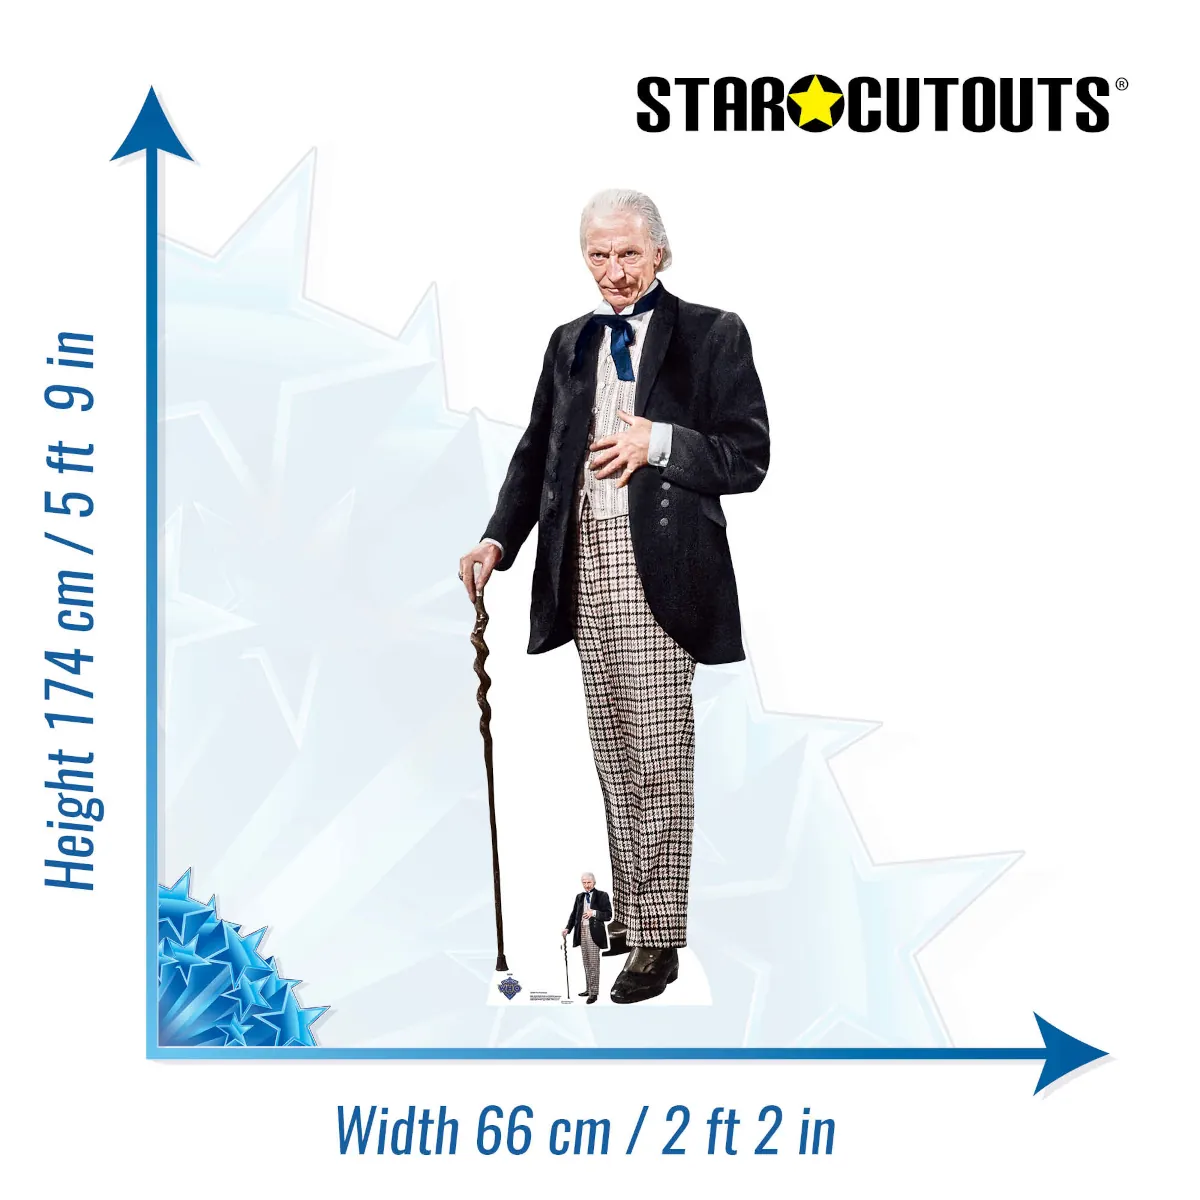 SC4401 The First Doctor 'William Hartnell' (Doctor Who) Official Lifesize + Mini Cardboard Cutout Standee Size